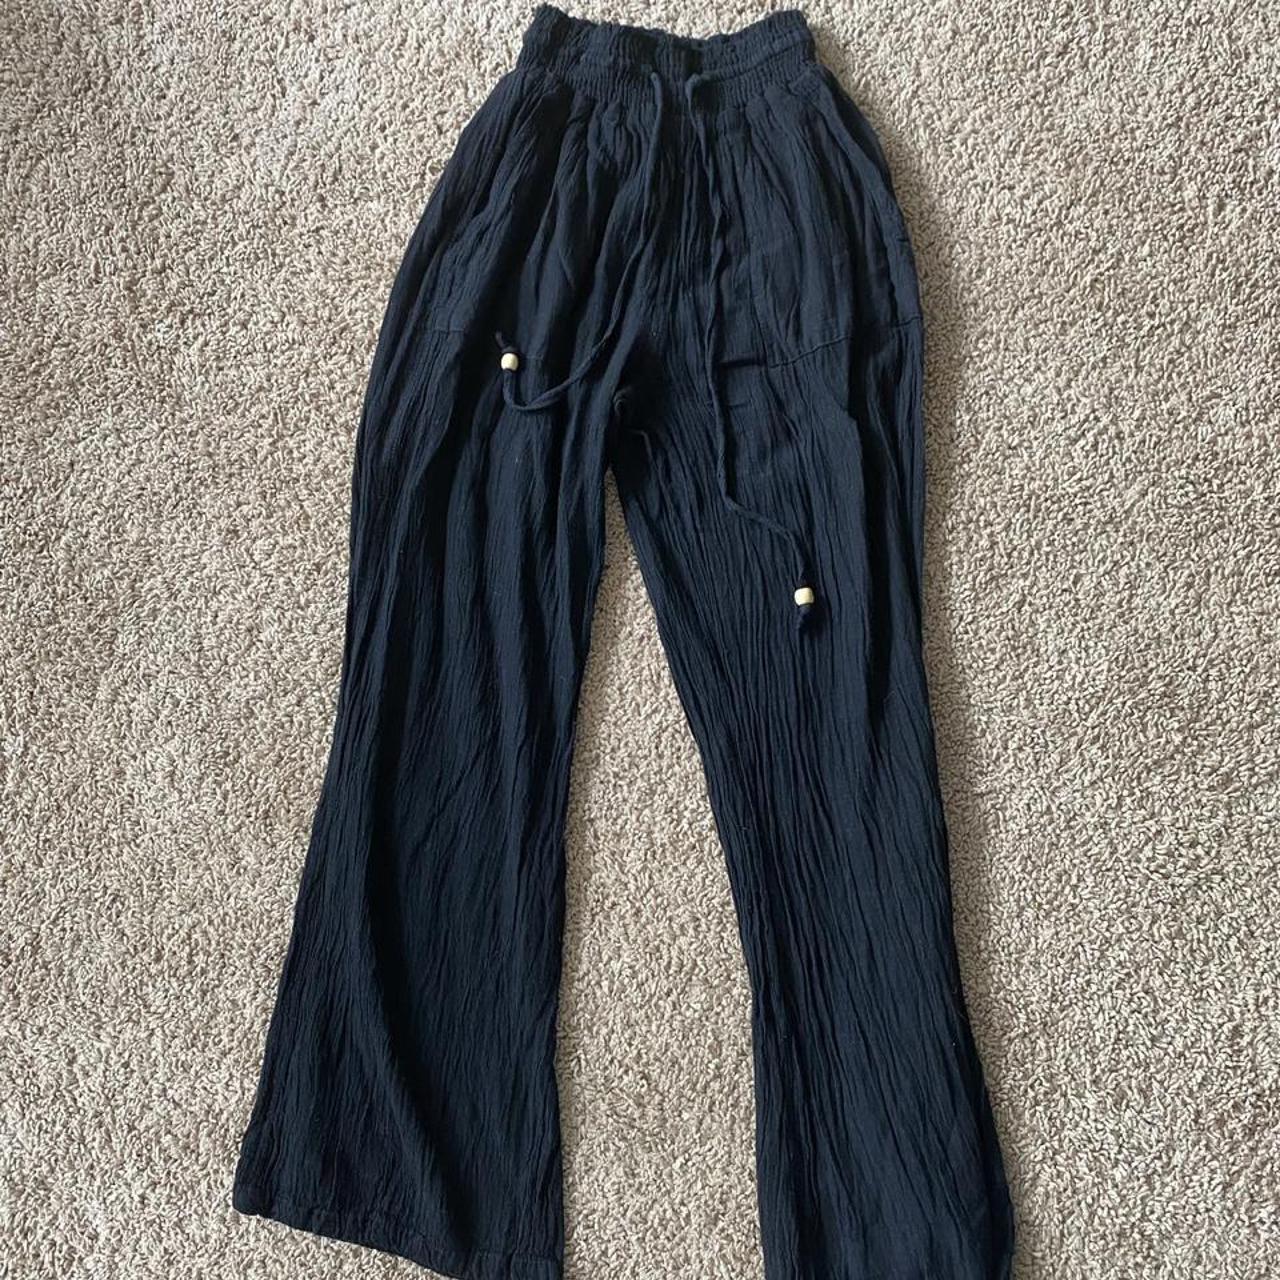 Product Image 1 - black flare pants in size